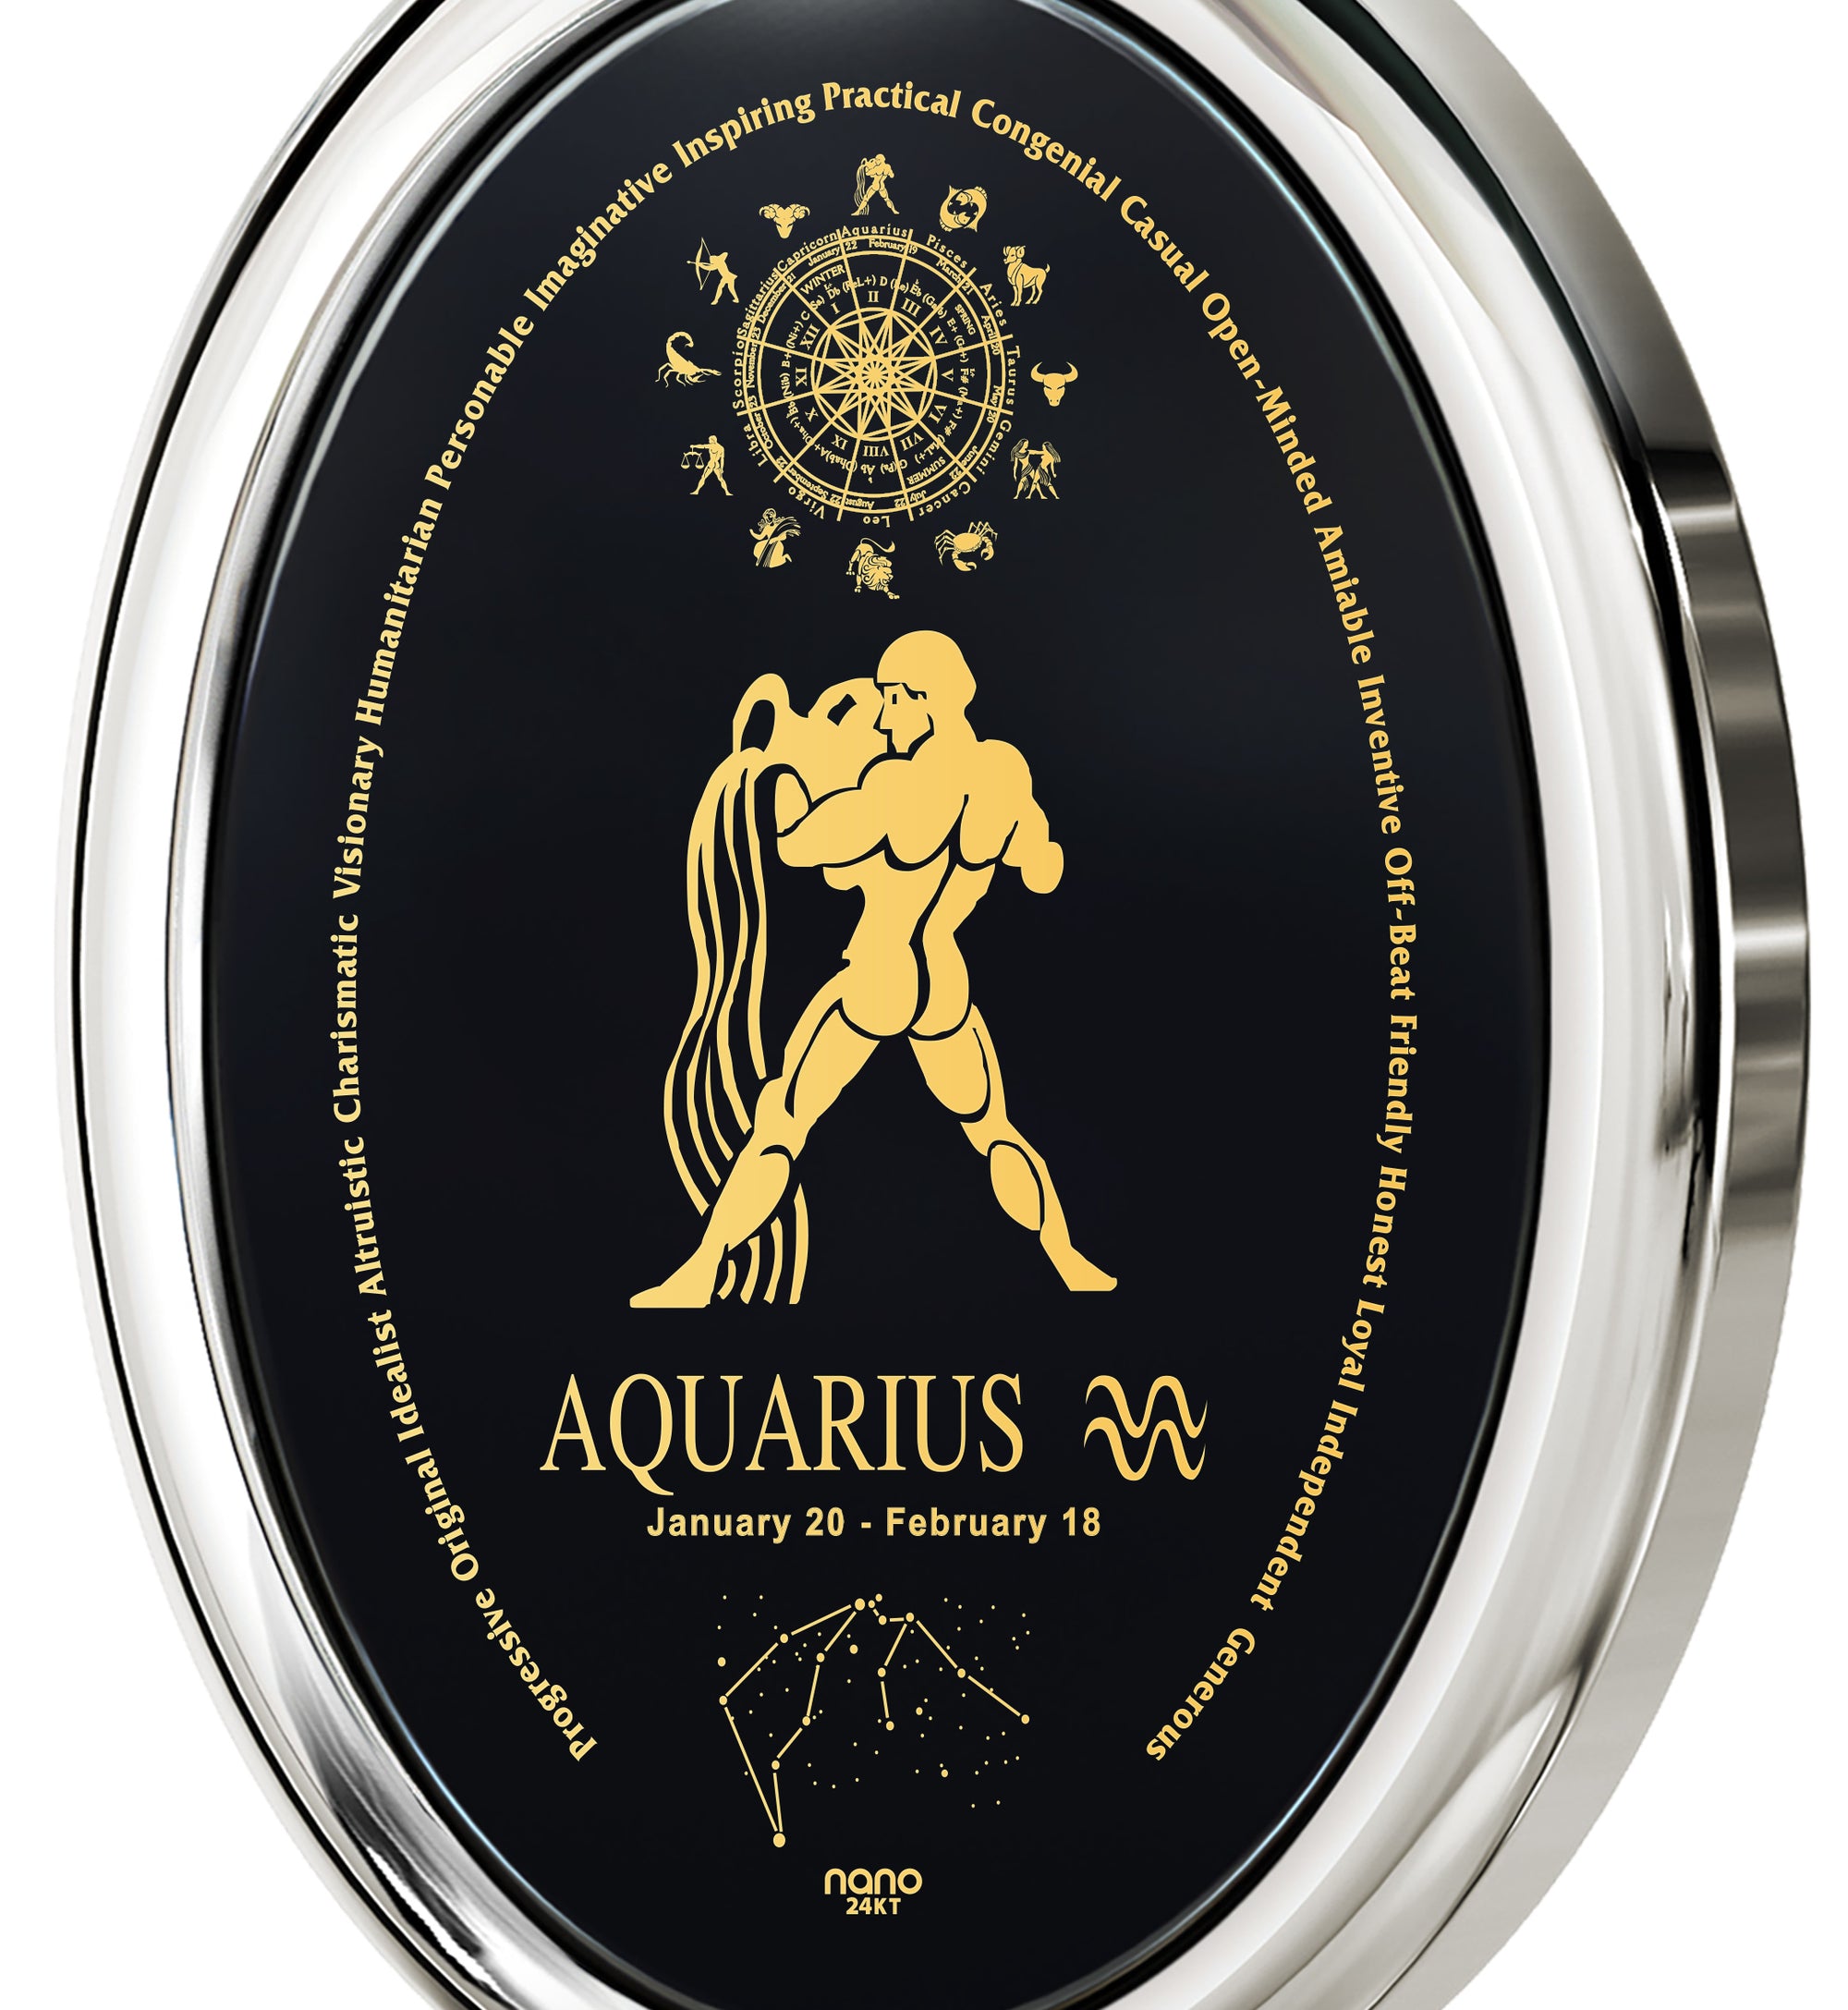 World\'s Only 24k Unique Inscribed | NanoStyle Aquarius Gift Gold Jewelry Necklace - Zodiac